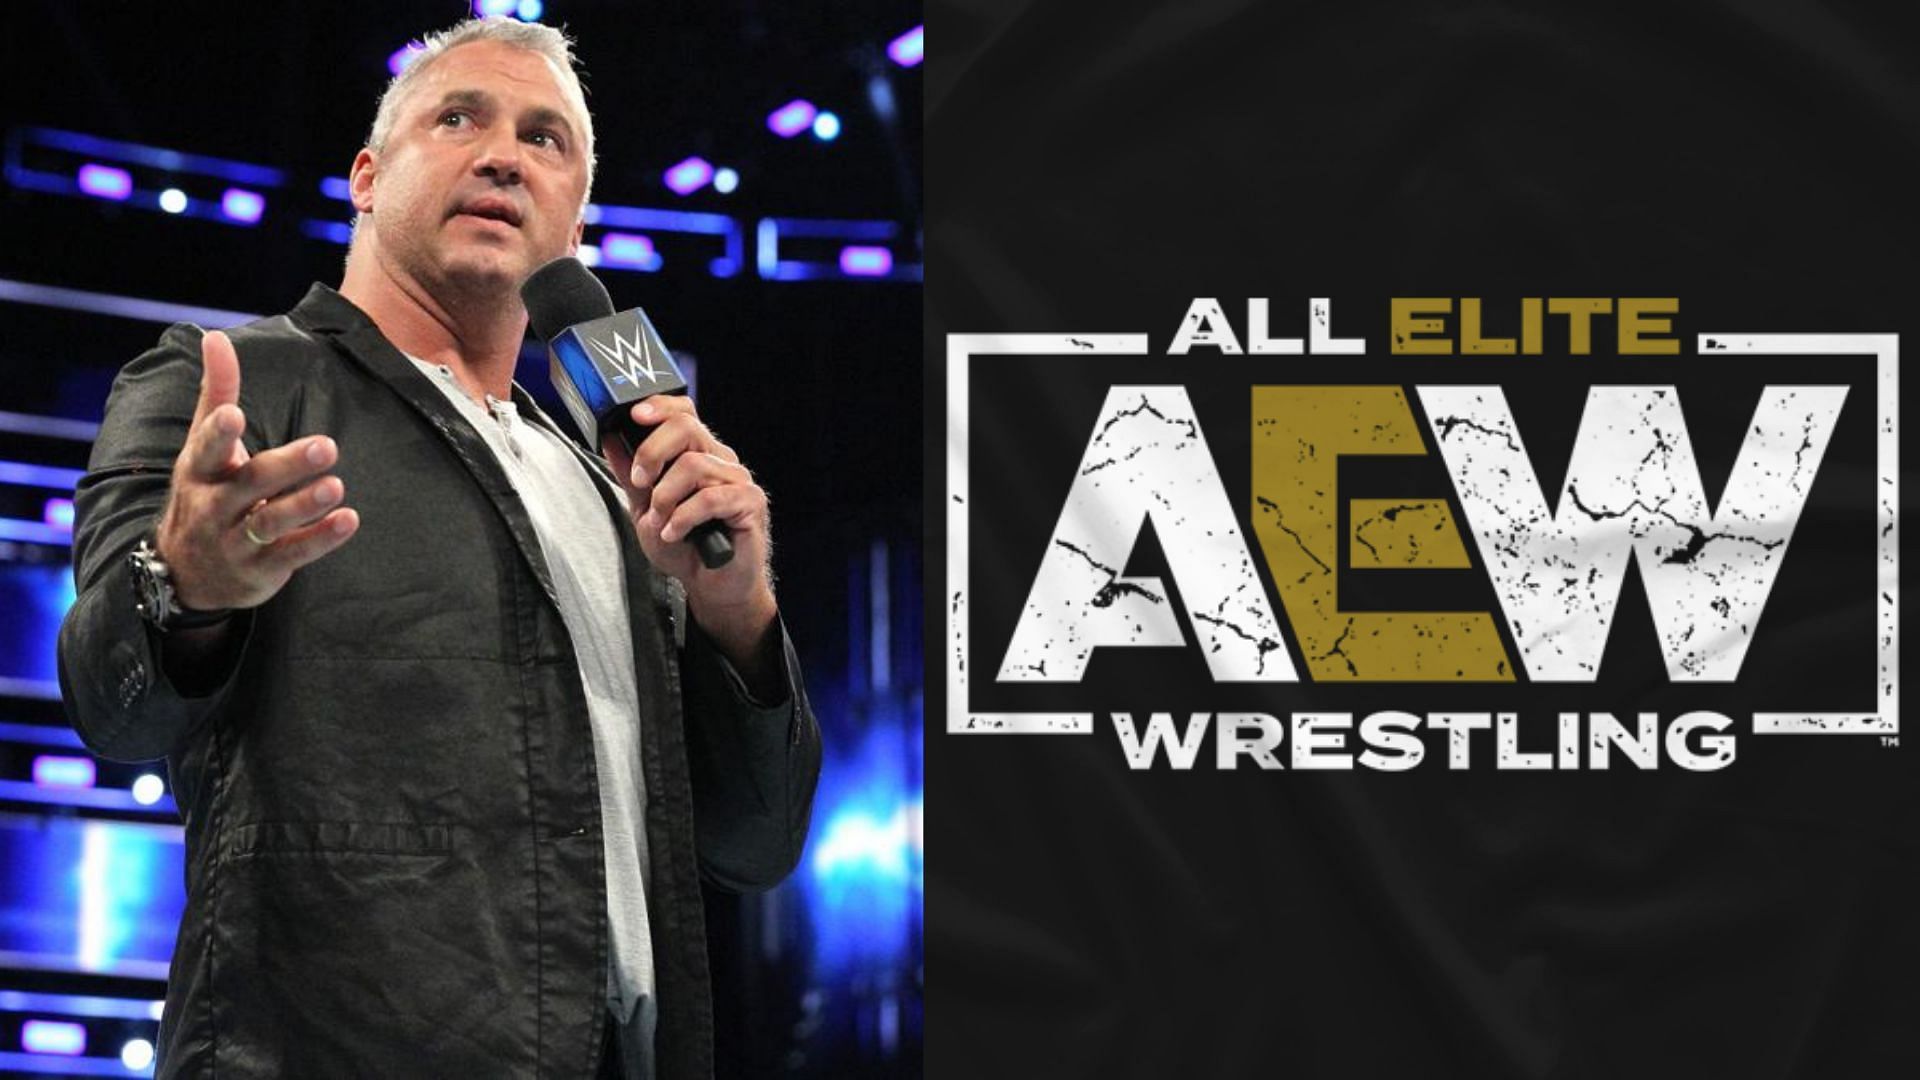 Would Shane McMahon joining AEW be a good move?